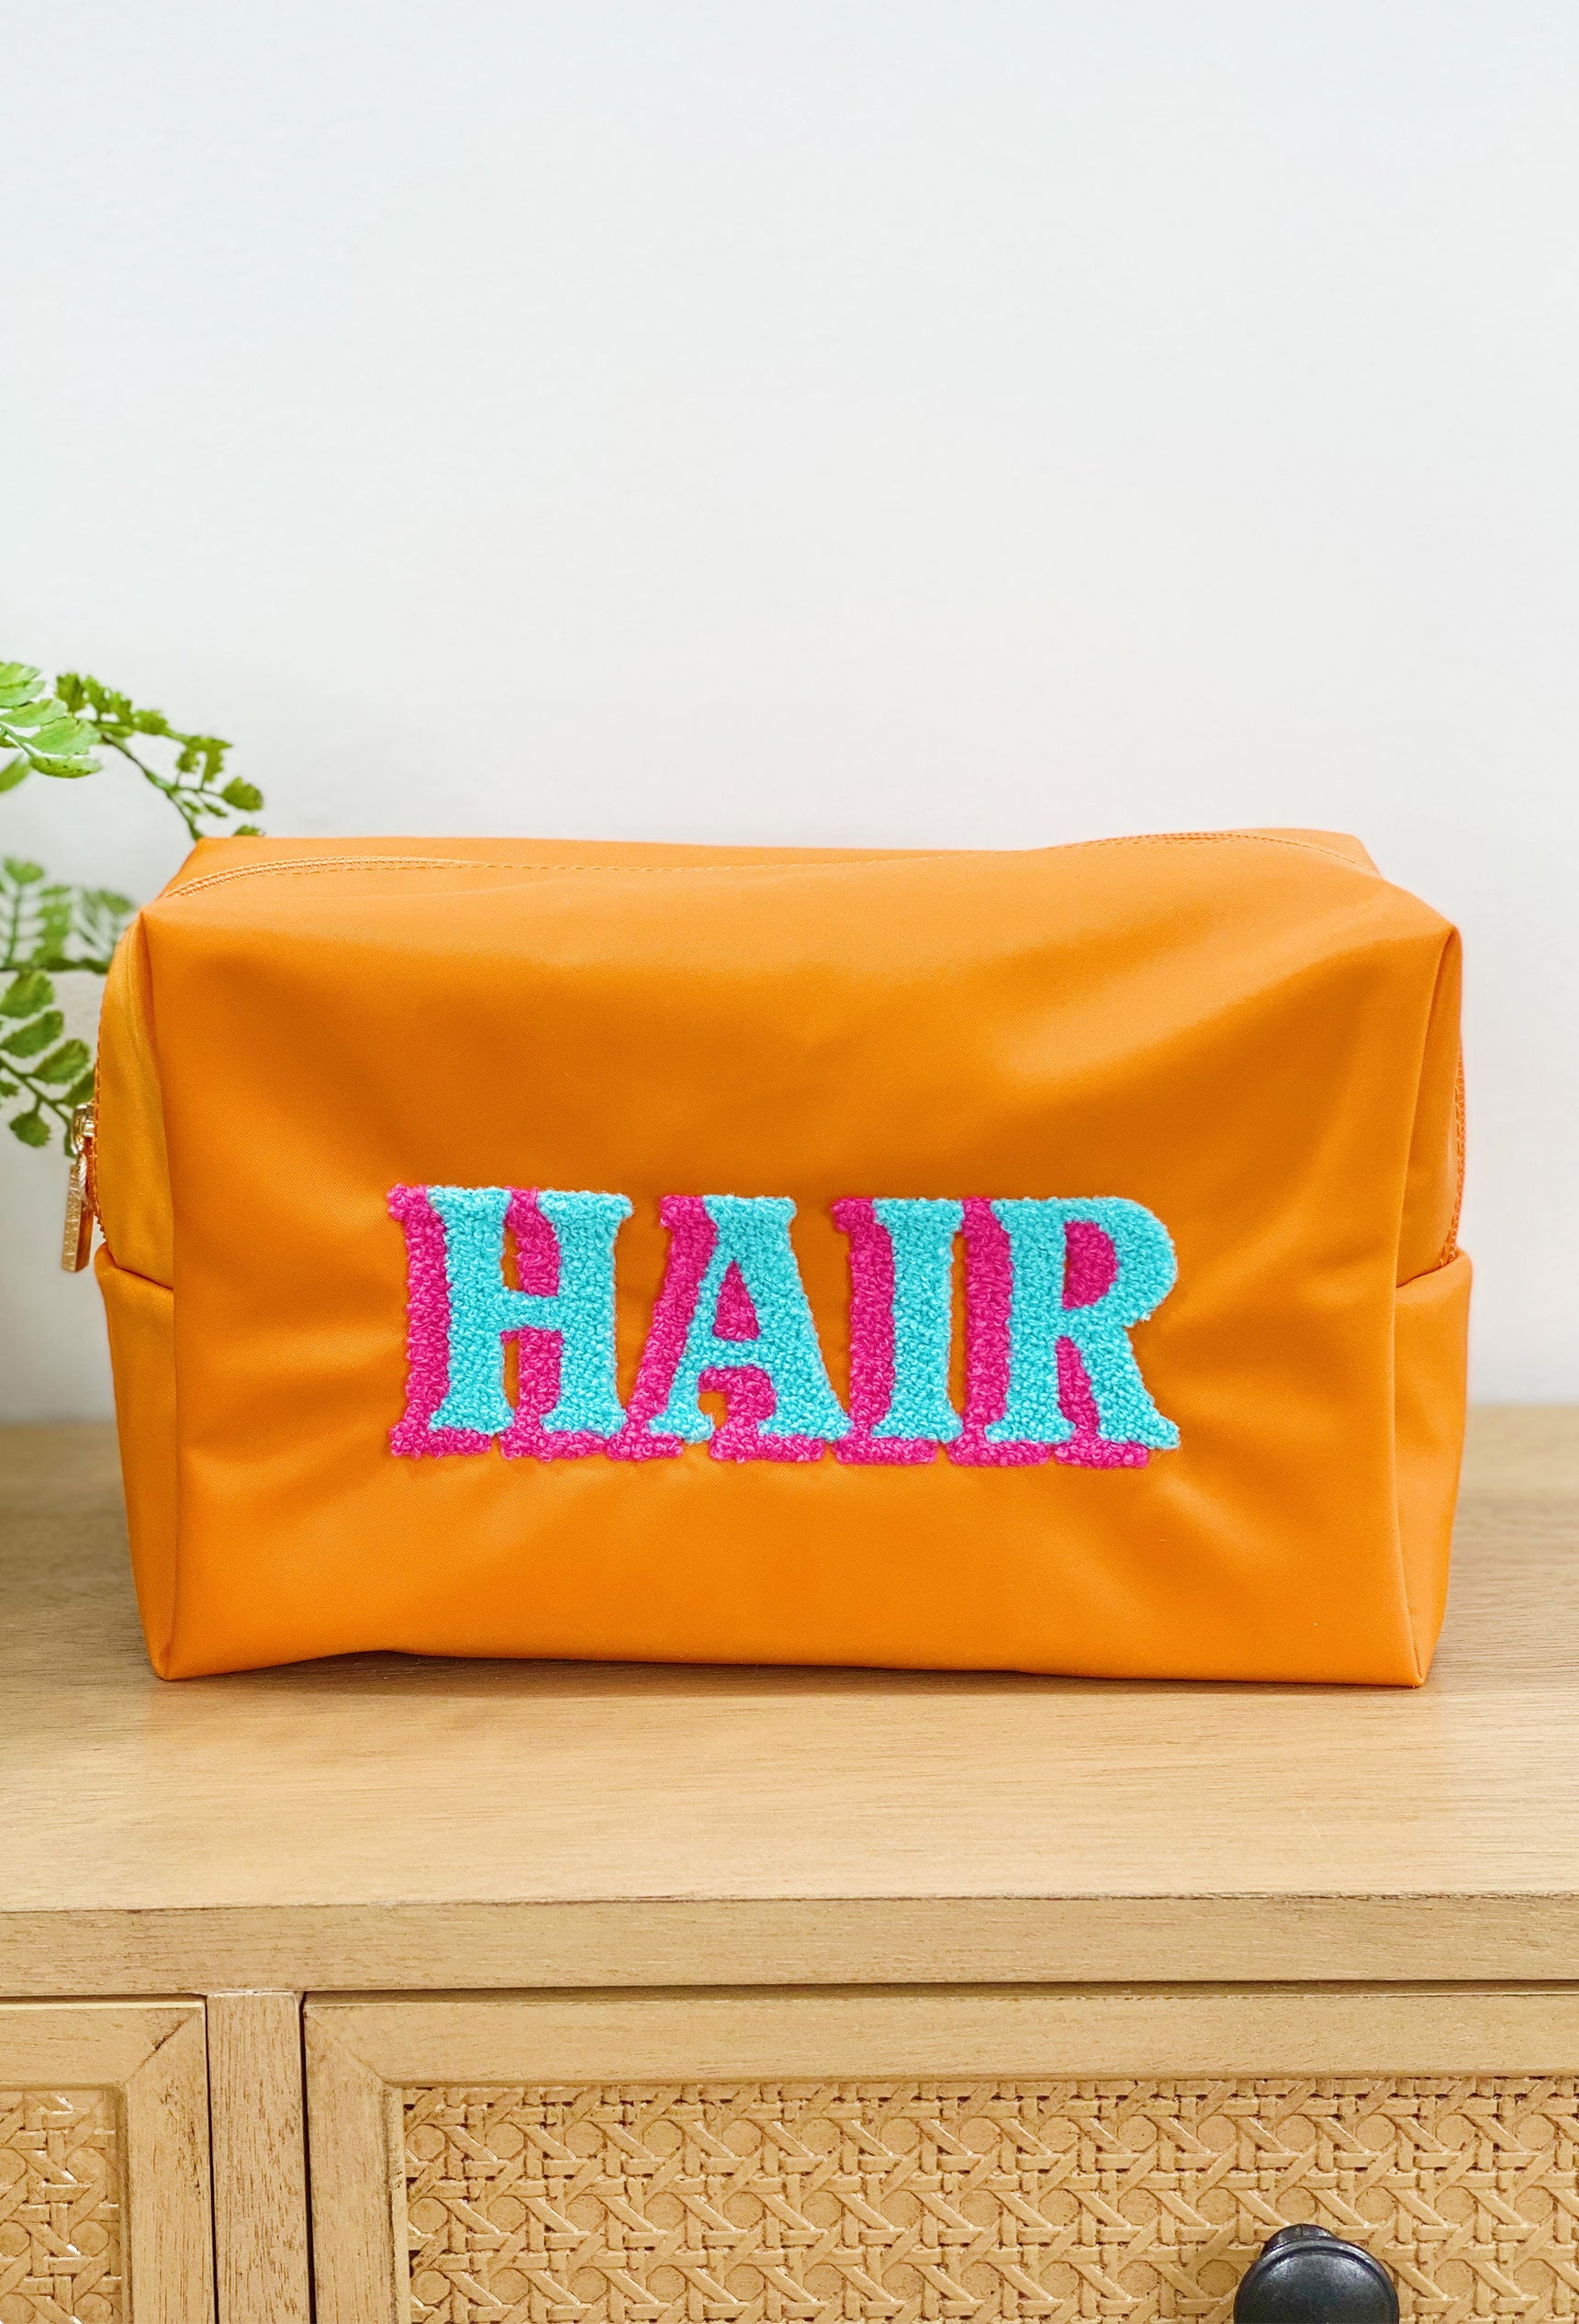 Hair Nylon Cosmetic Bag, orange nylon cosmetic bag with blue and pink "hair"patch